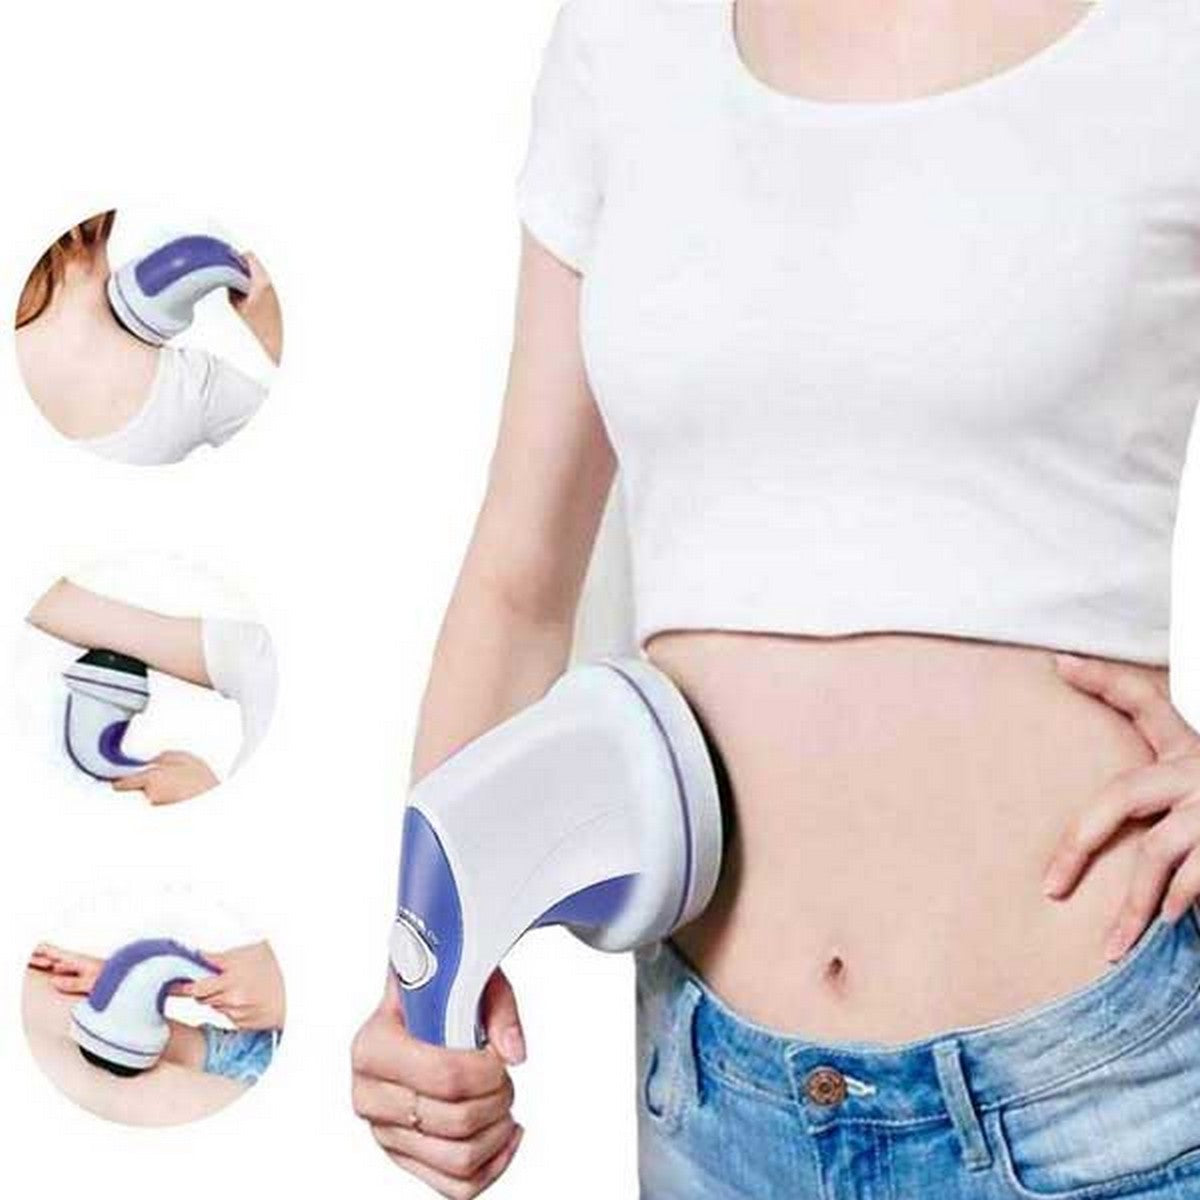 Relax And Spin Tone Body Massager(3in 1)